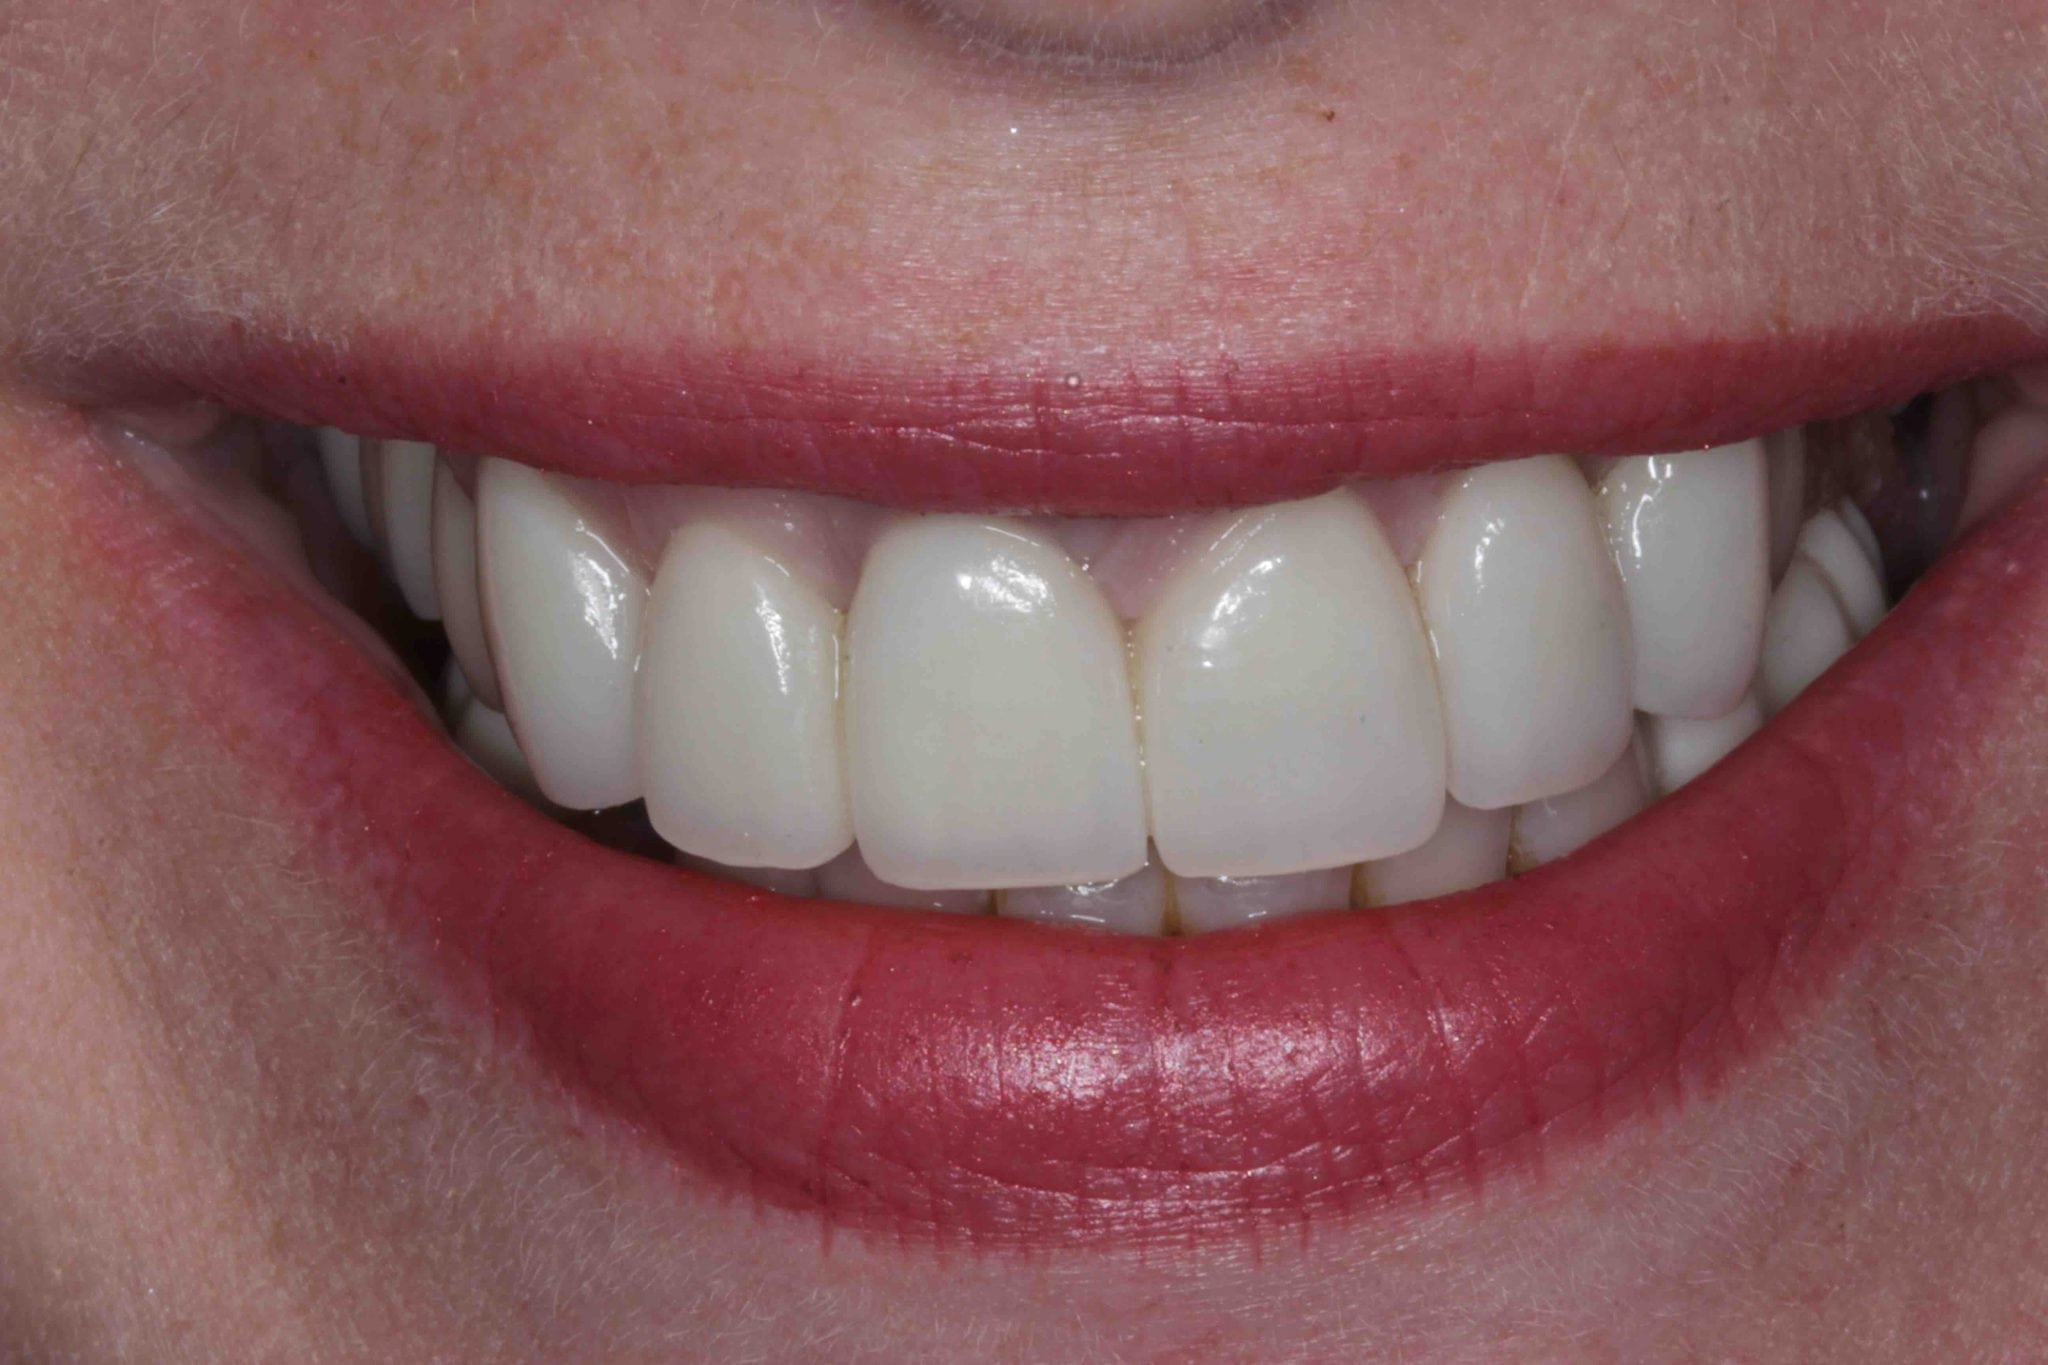 Replacement of Fractured Tooth with Dental Implant  in upper front - before after images